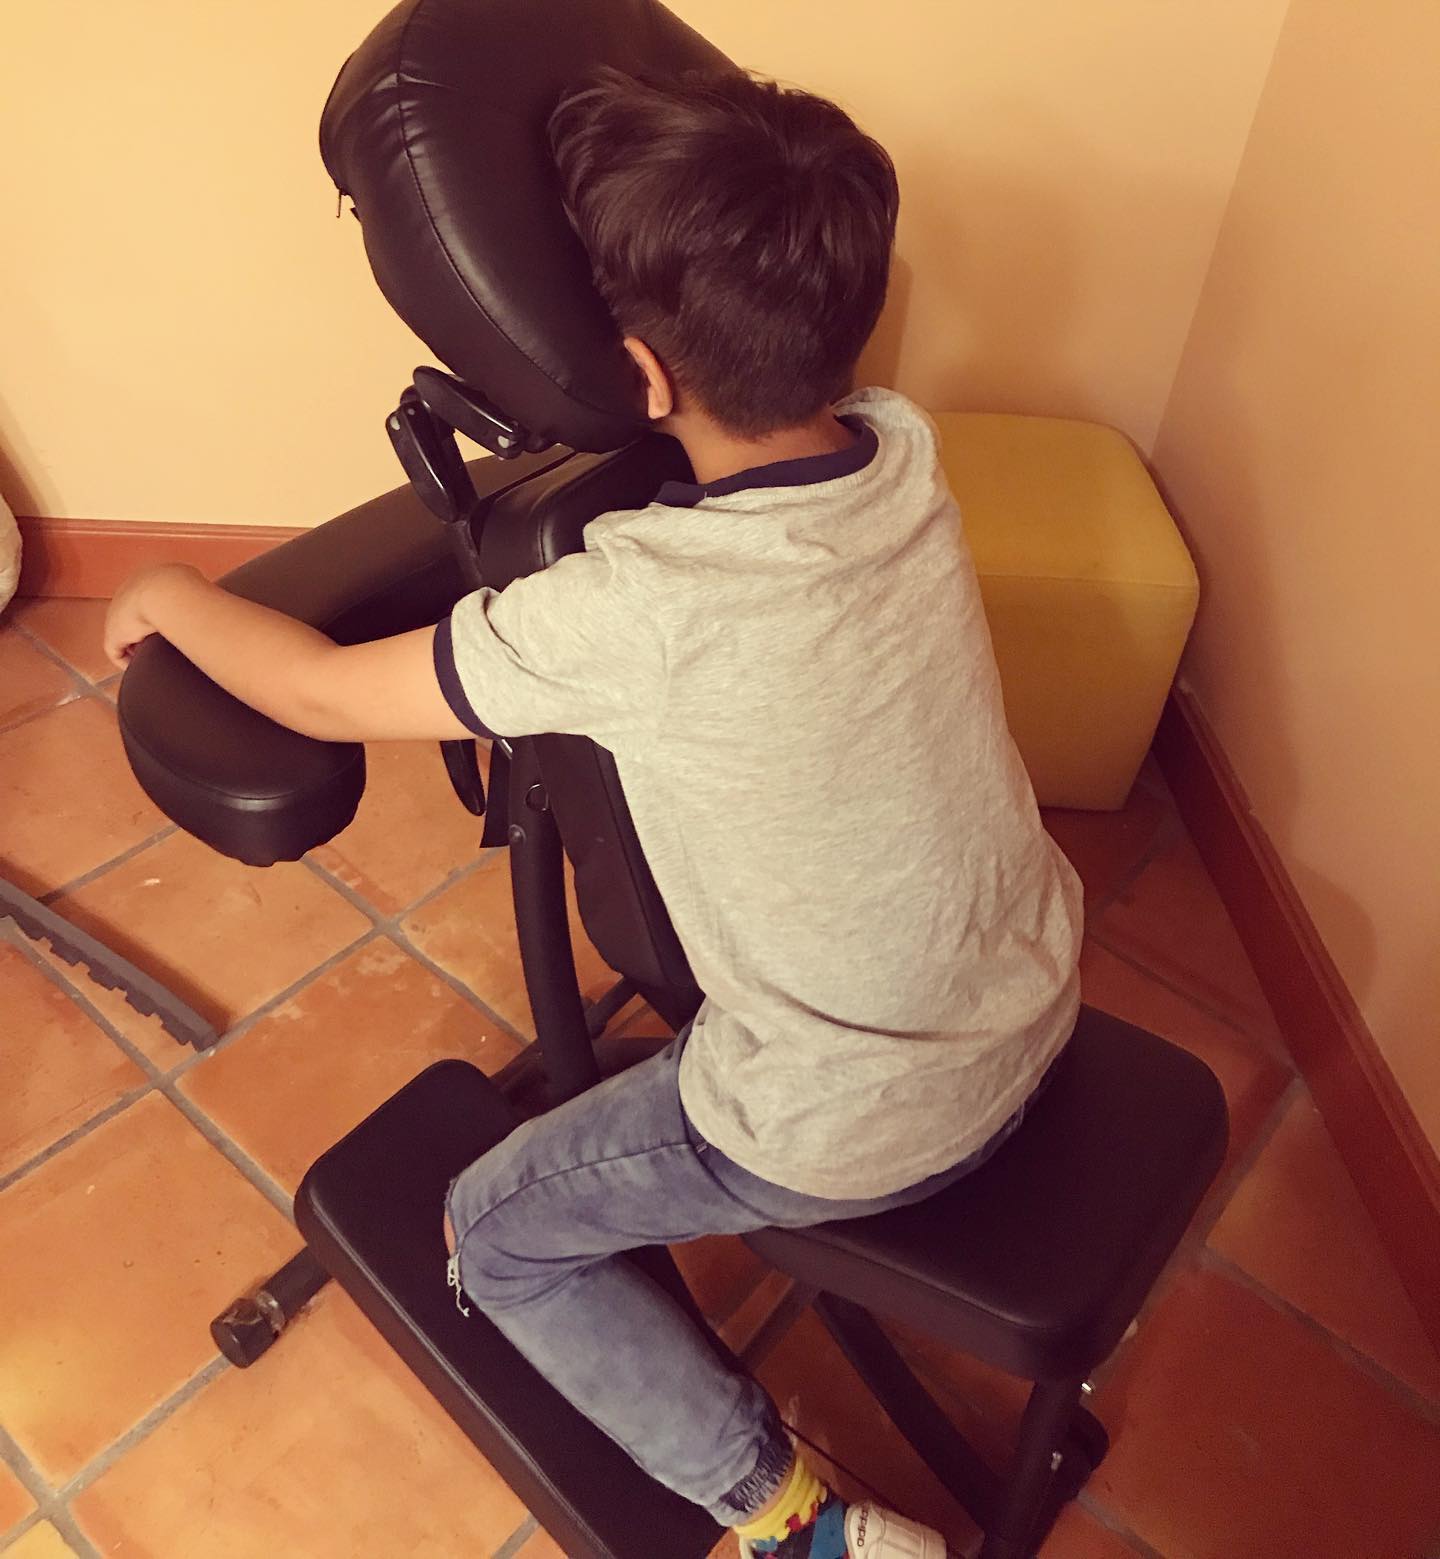 Babies,Kids and Teenagers grows so fast . The Body & Mind needed a great care . 🌱🙏Massage Therapy For Kids is a precious Gift 💝 

#kids #massagetherapy #massagetherapyforkids #wellness #chairmassage #parenting #care #growing